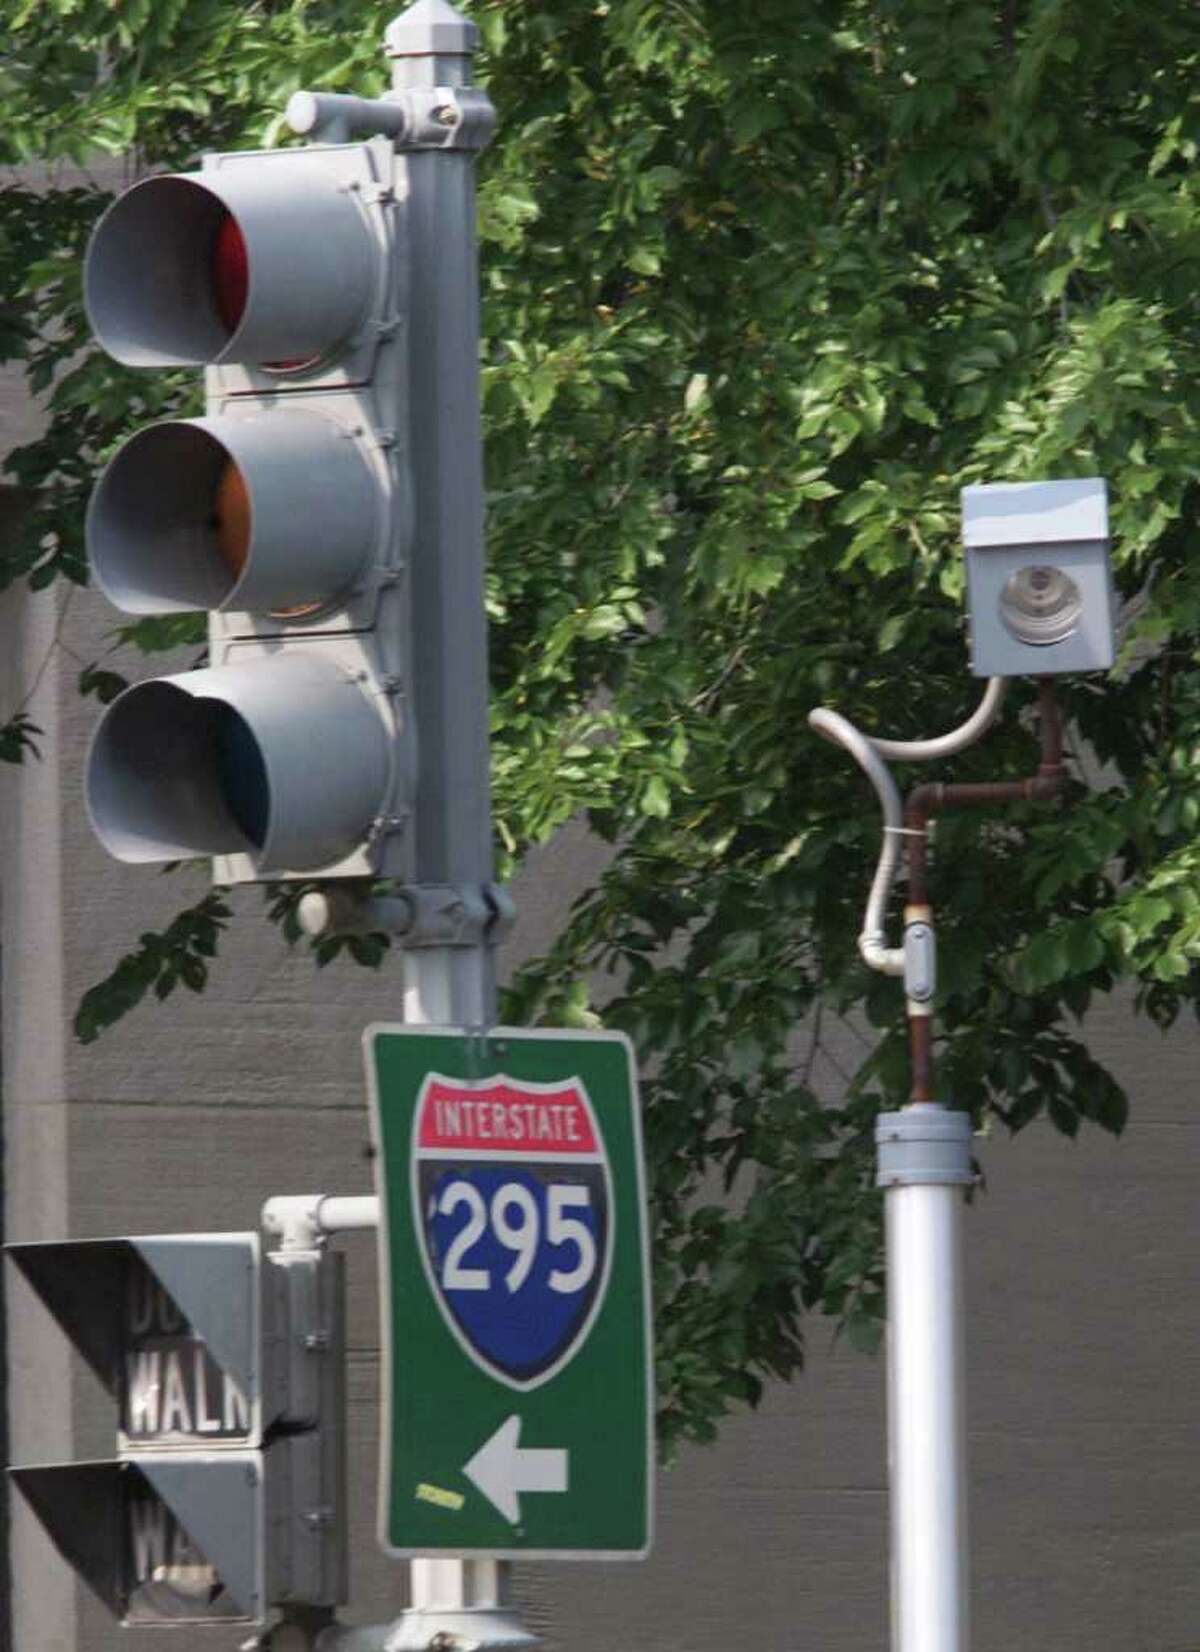 A camera is placed near a traffic light for drivers who run red lights on Constitution Avenue in Washington, DC. in 2001. The camera takes a picture of the car and license plate and the offender is mailed a citation. (Photo by Mark Wilson/Getty Images)